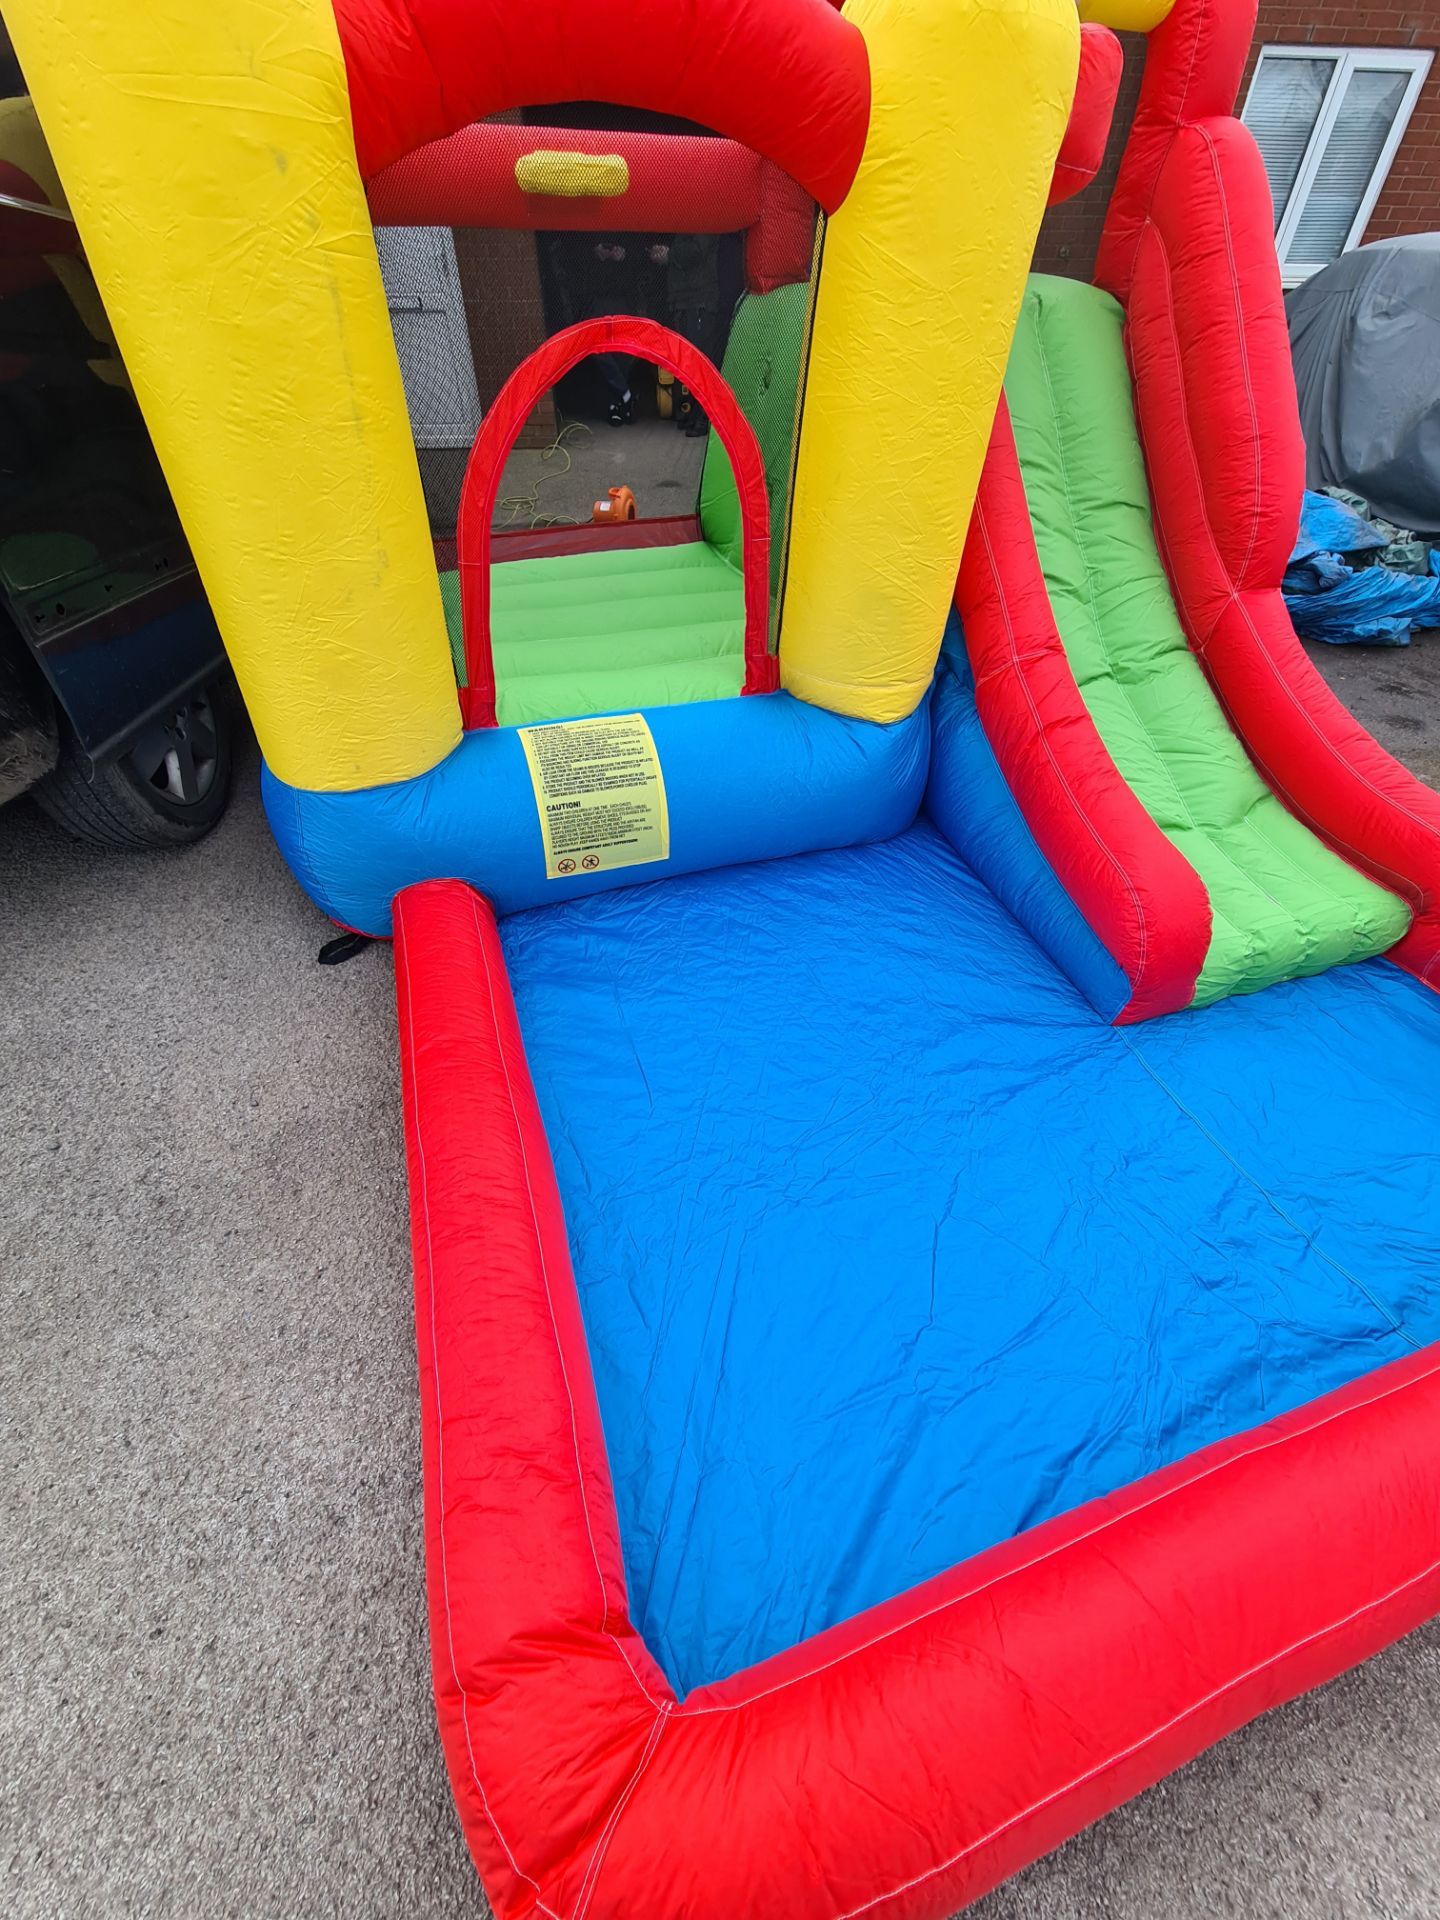 3 X BRAND NEW - KIDS BLOW-UP WET & DRY BOUNCY PLAY AREA - NEW - Image 7 of 14